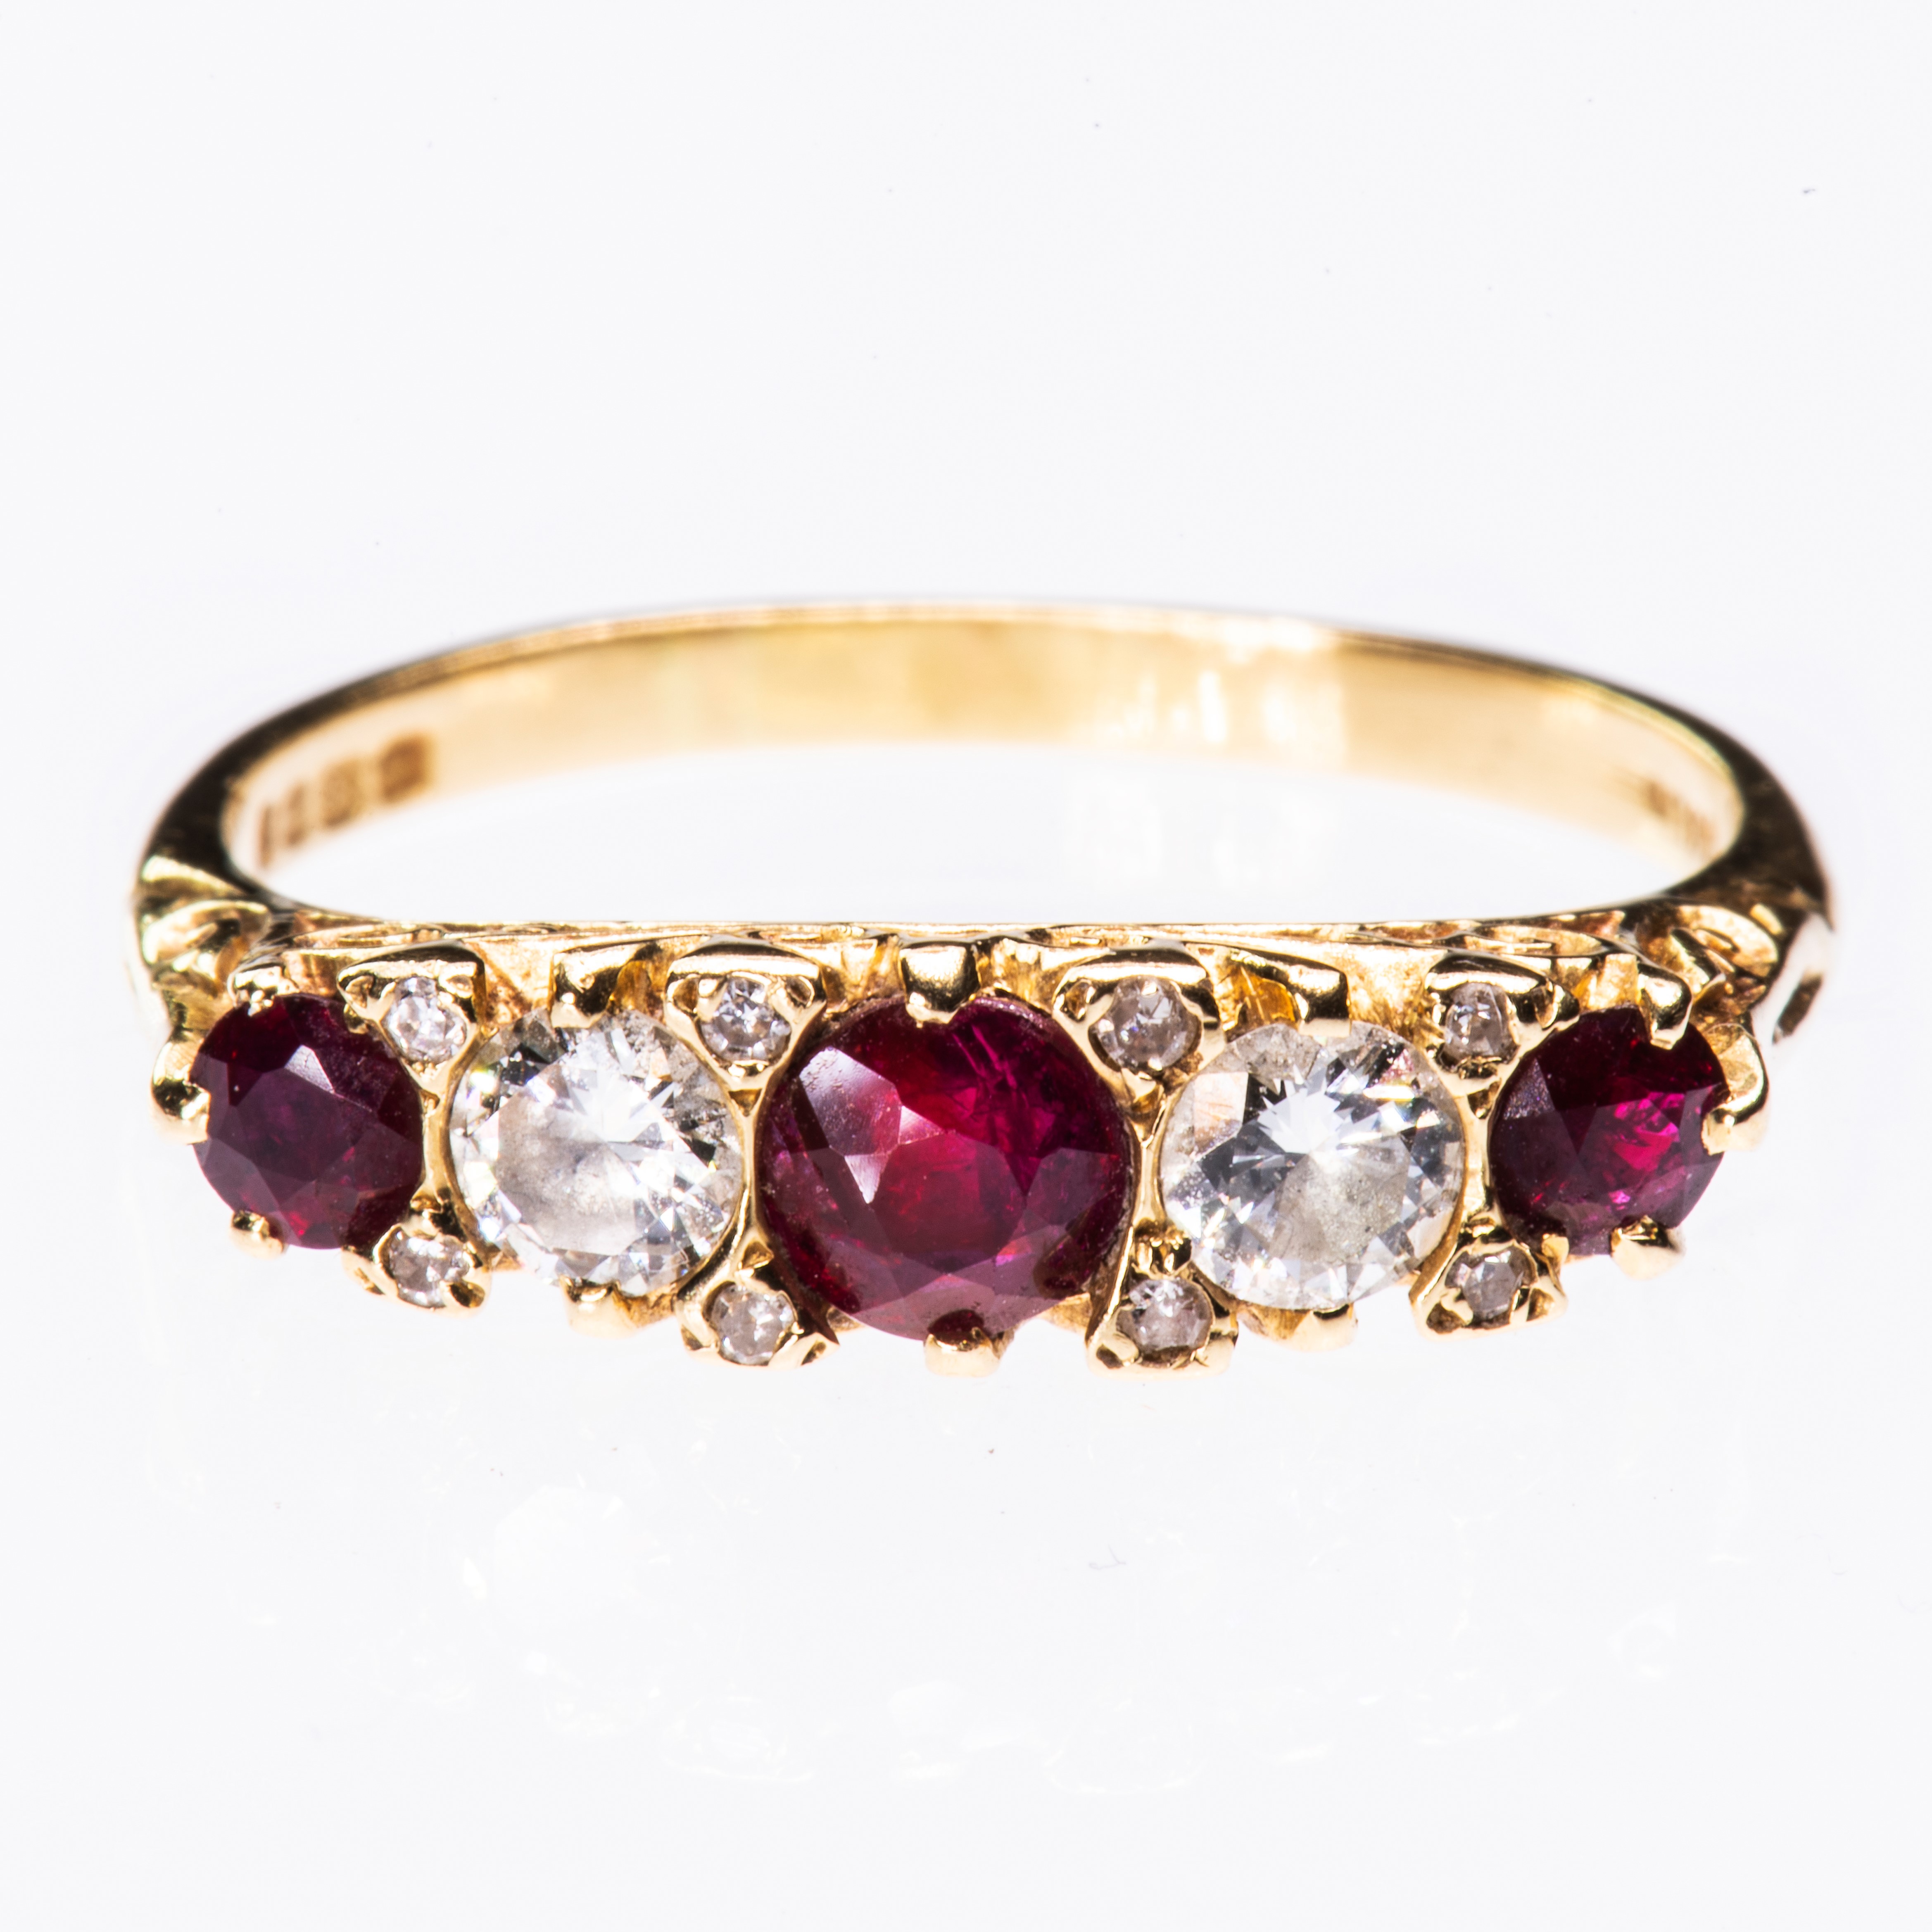 A VICTORIAN 18CT YELLOW GOLD RUBY AND DIAMOND RING